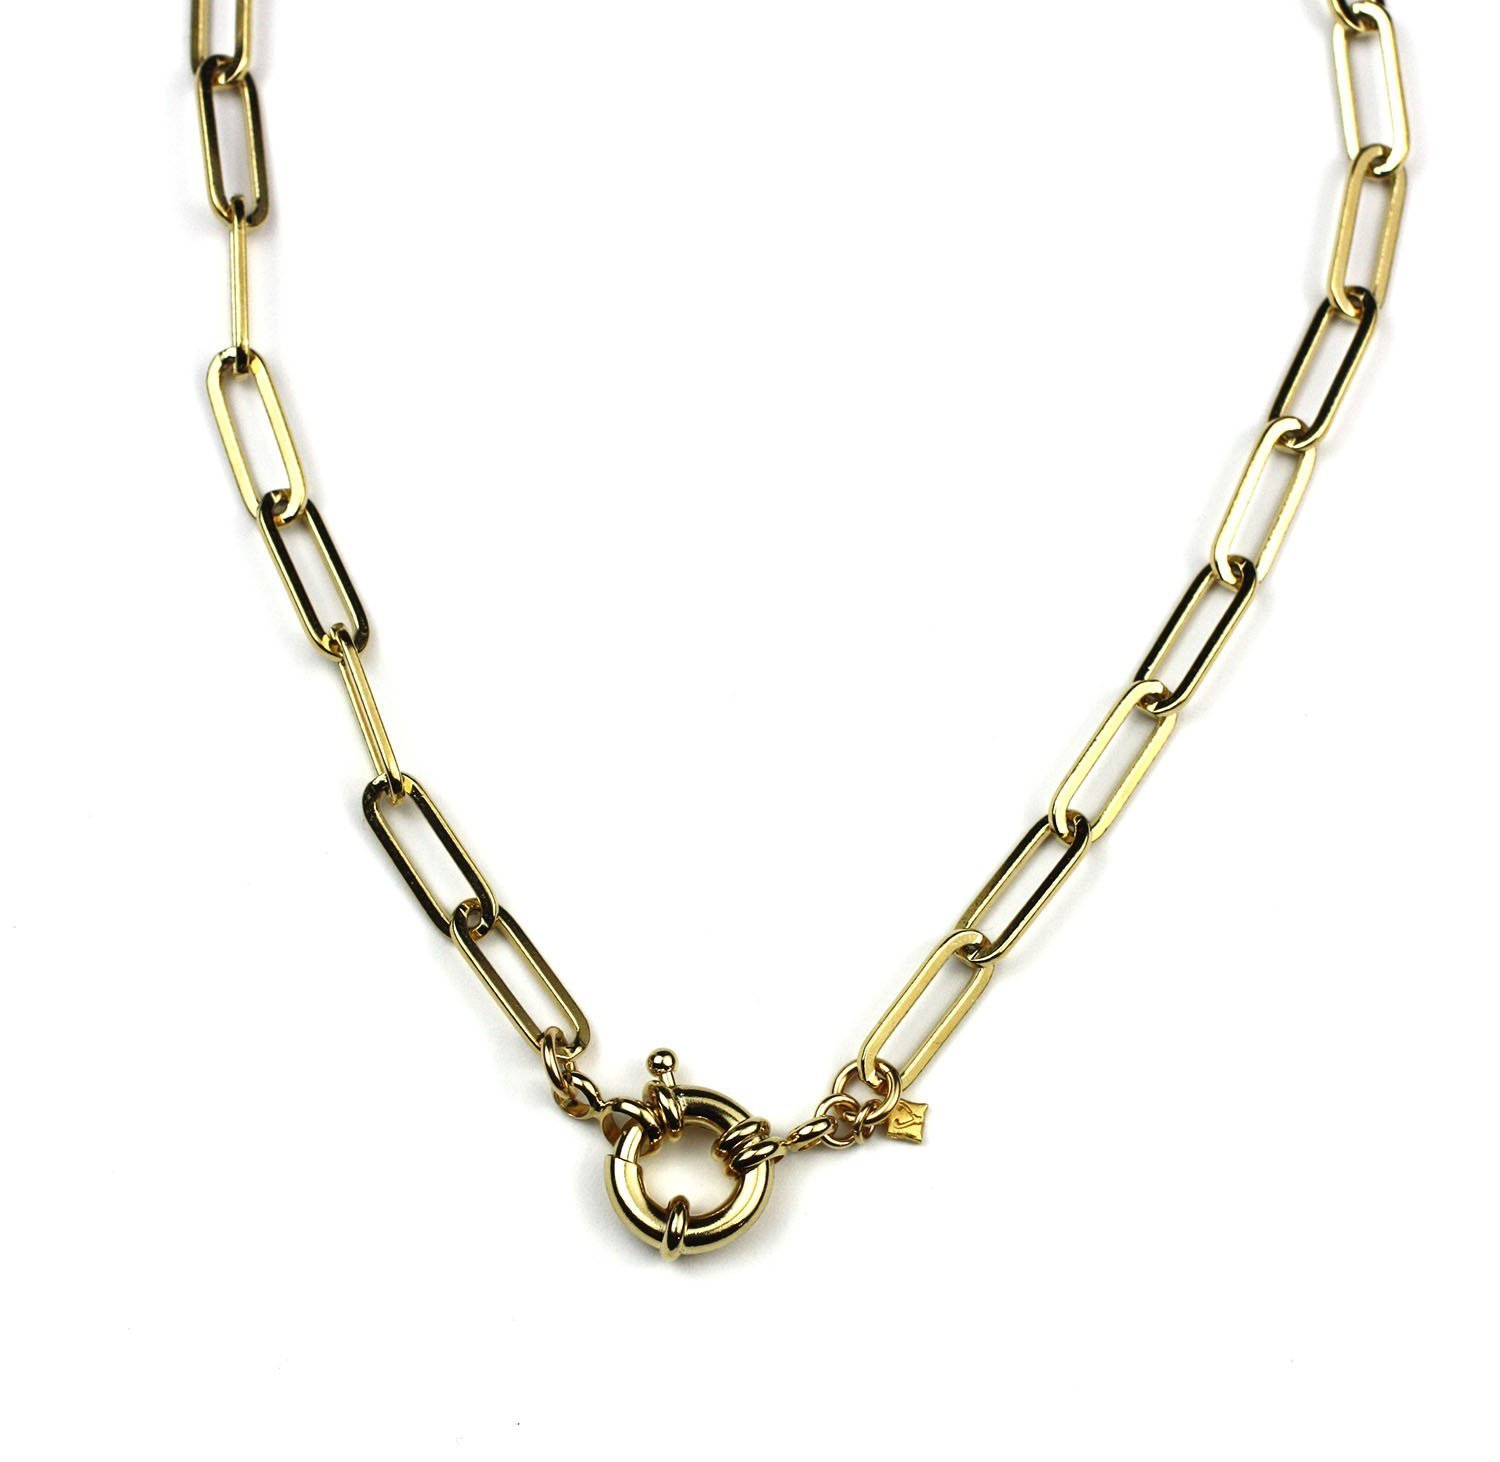 Buy 24k Gold-filled Paperclip Chain Necklace Online in India - Etsy